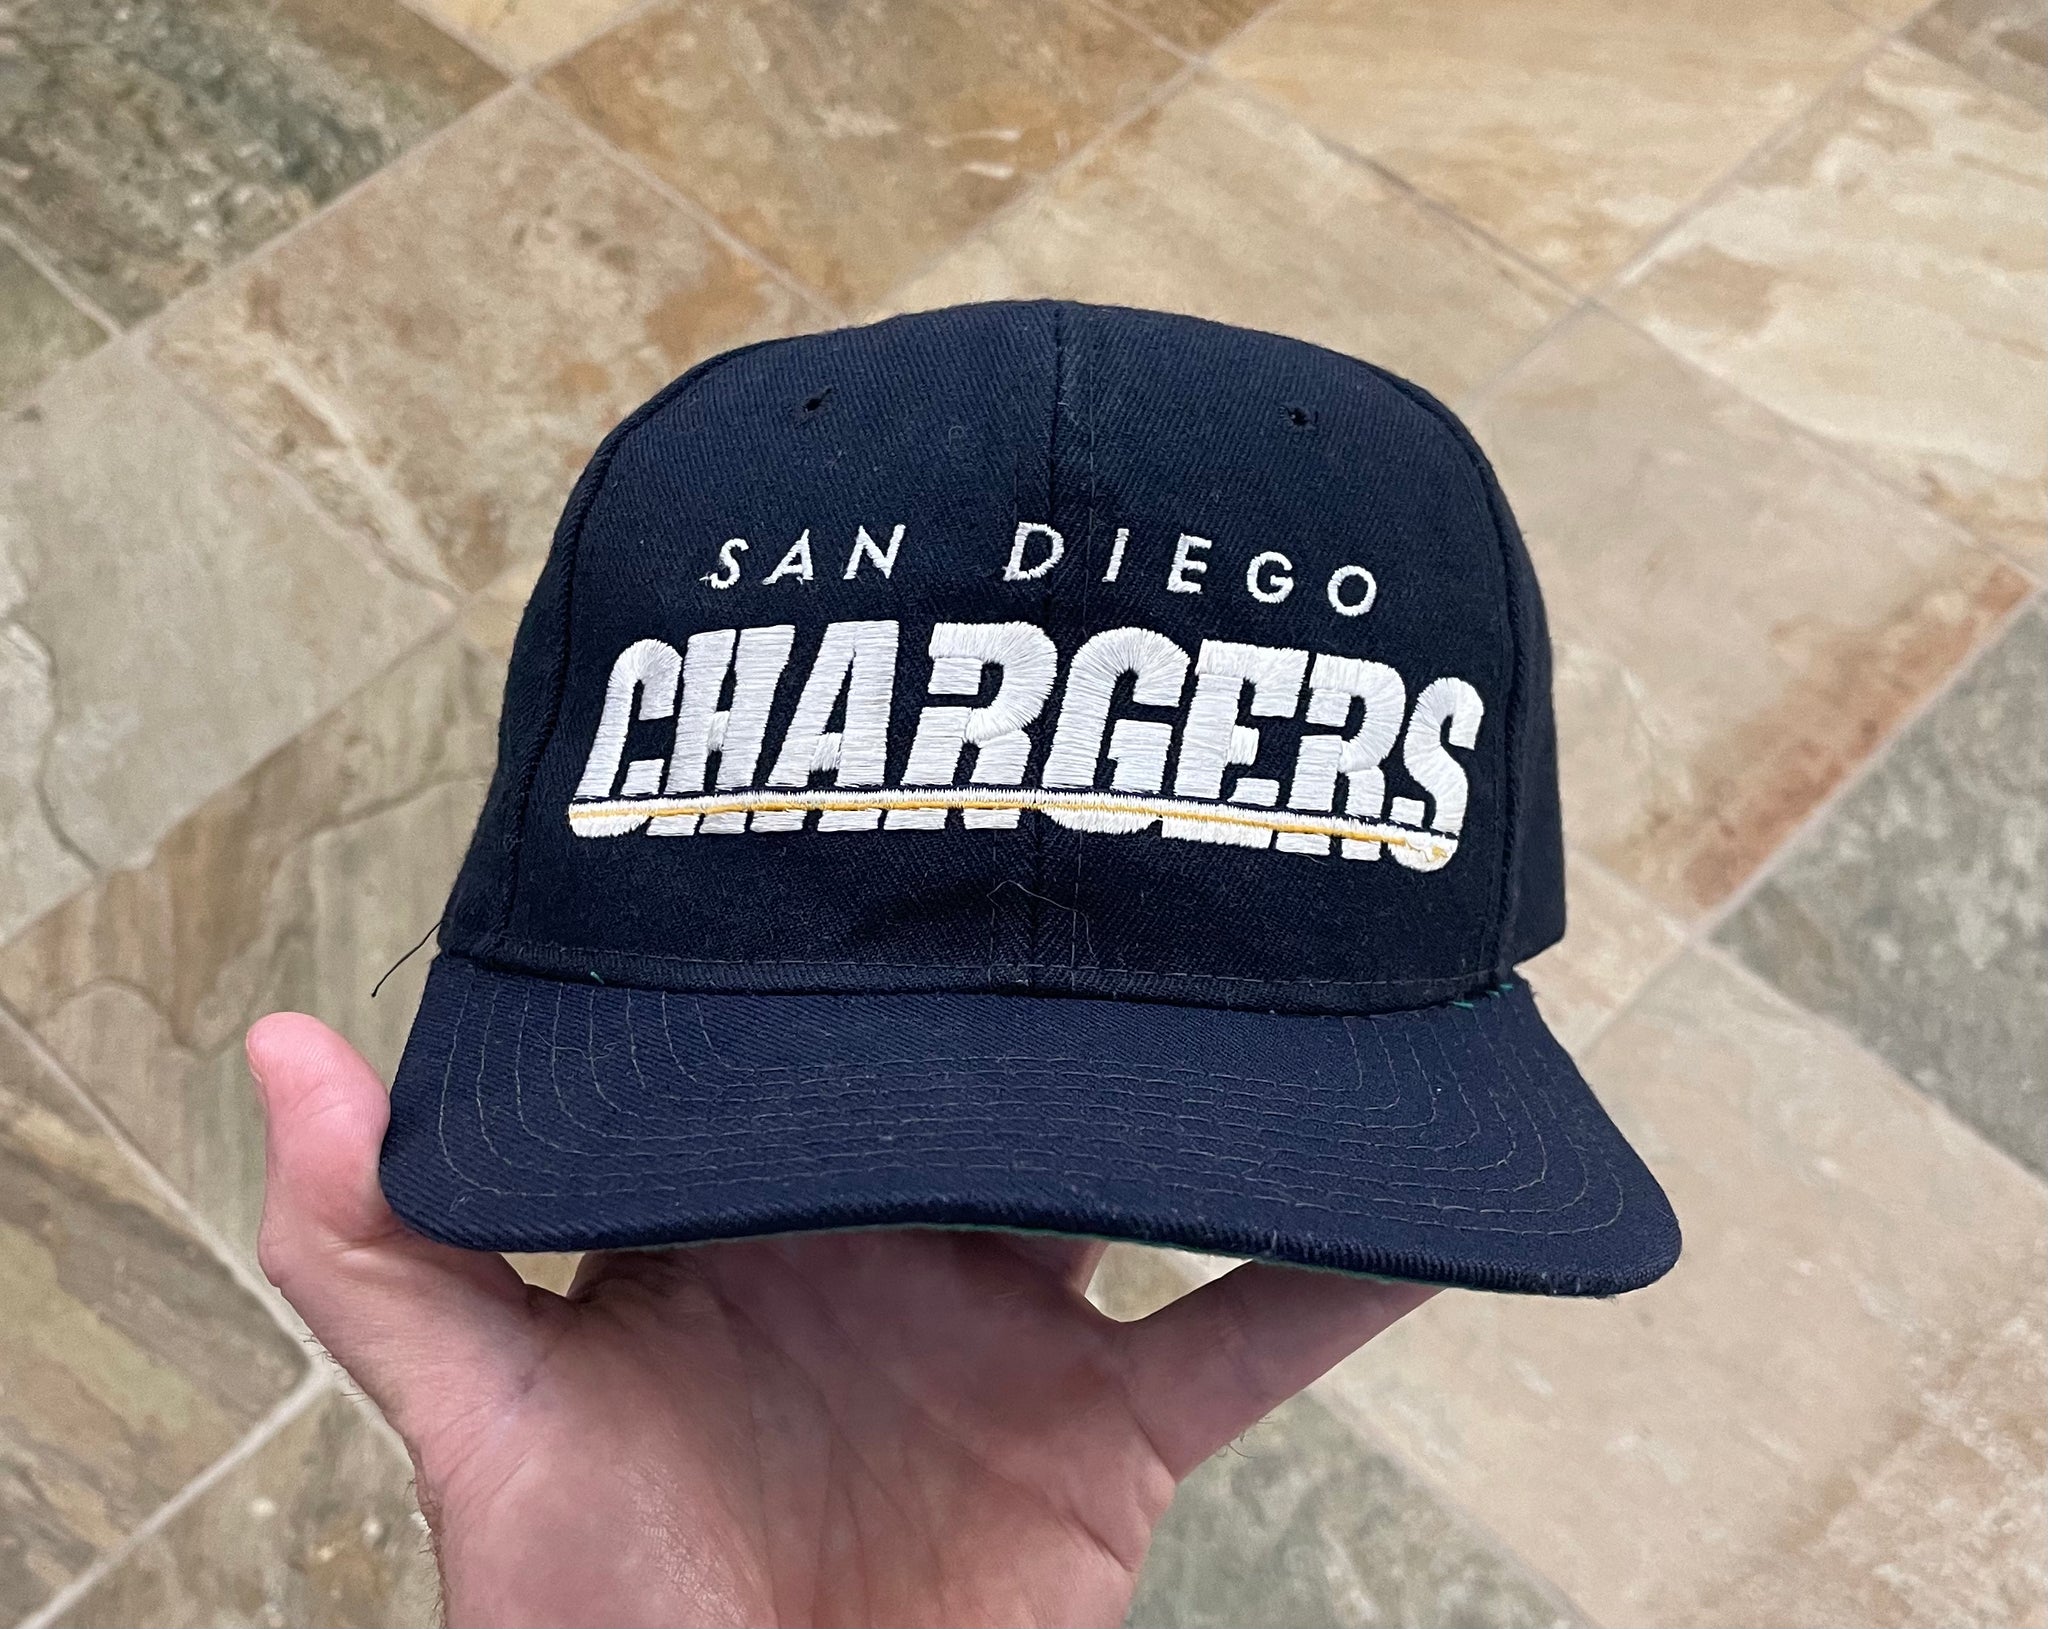 vintage chargers hat